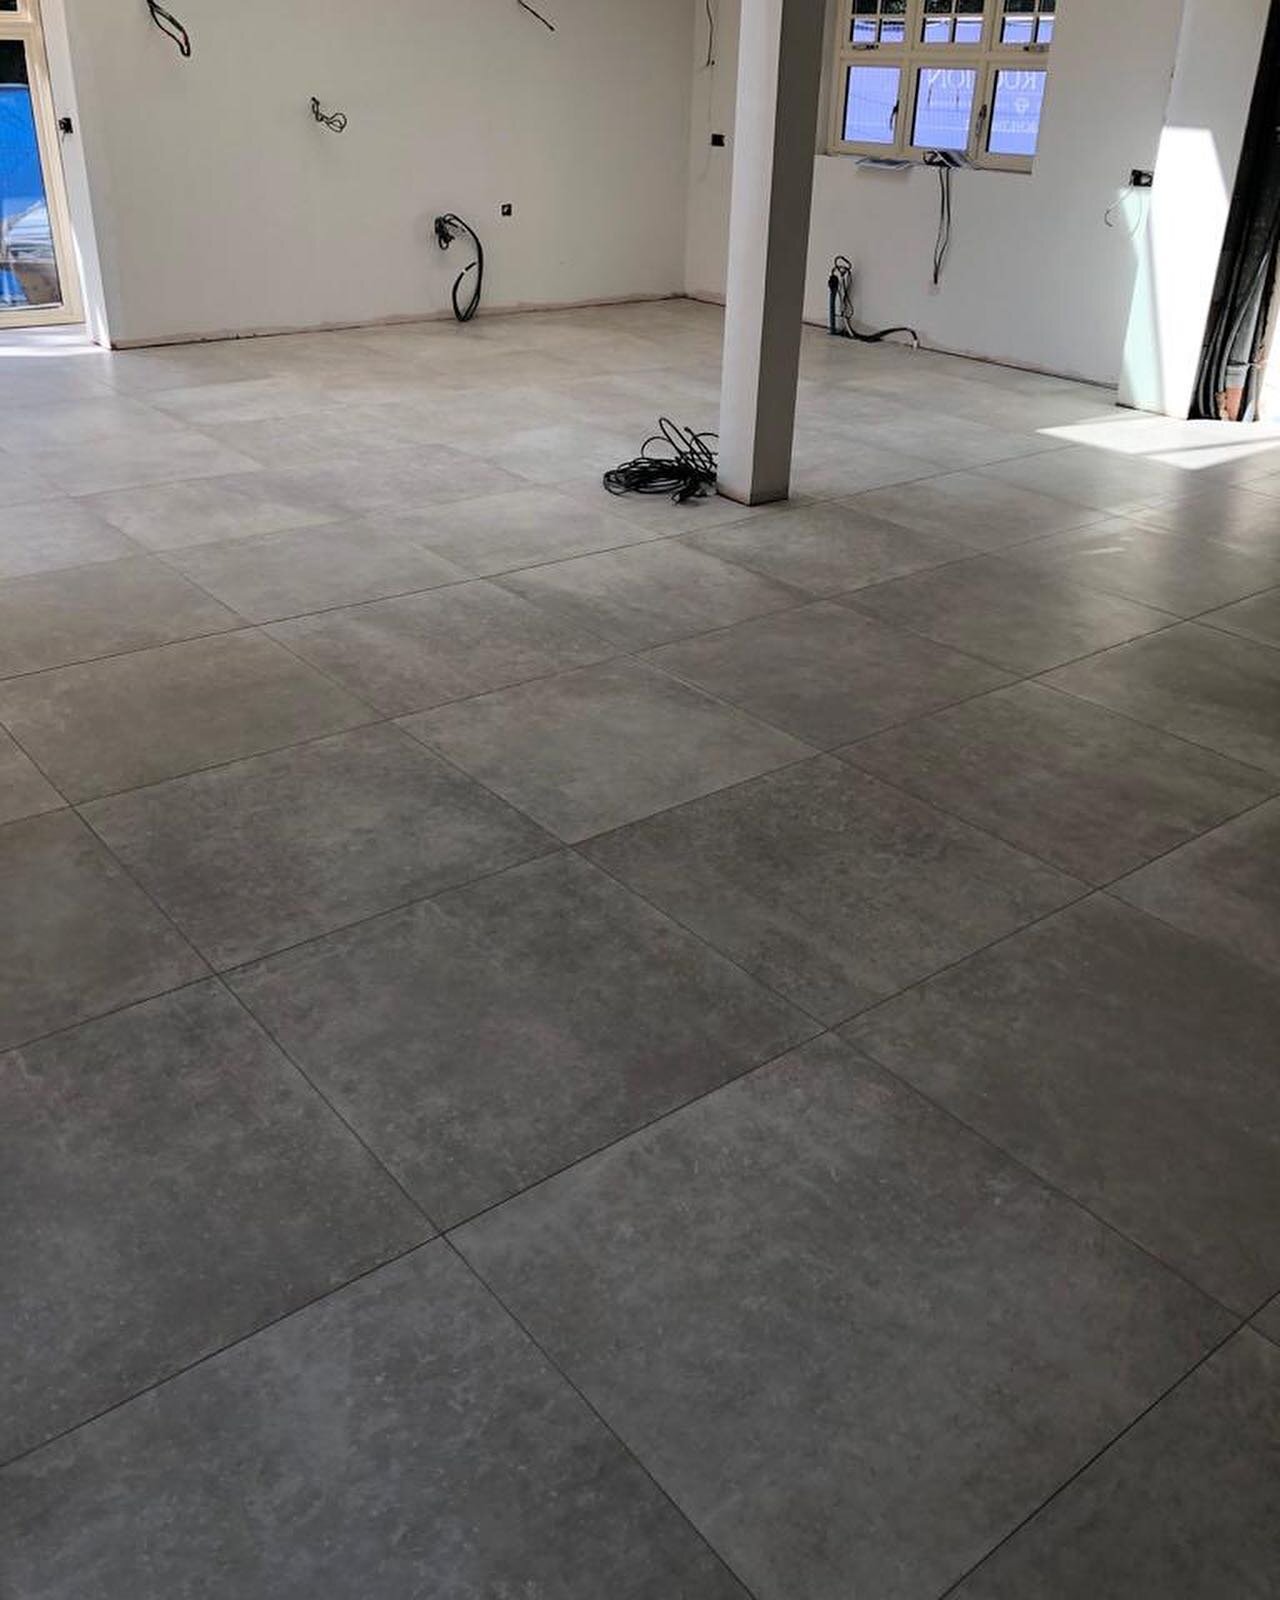 Completed kitchen and lounge area using 80x80 porcelain tiles supplied by @bocchettaceramica 
.
.
.
.
.
.
.
#kitchendesign #kitchen #lounge #tiles #tiling #tilingwork #interiordesign #interior #interiorarchitecture #architecture #design #living #luxu